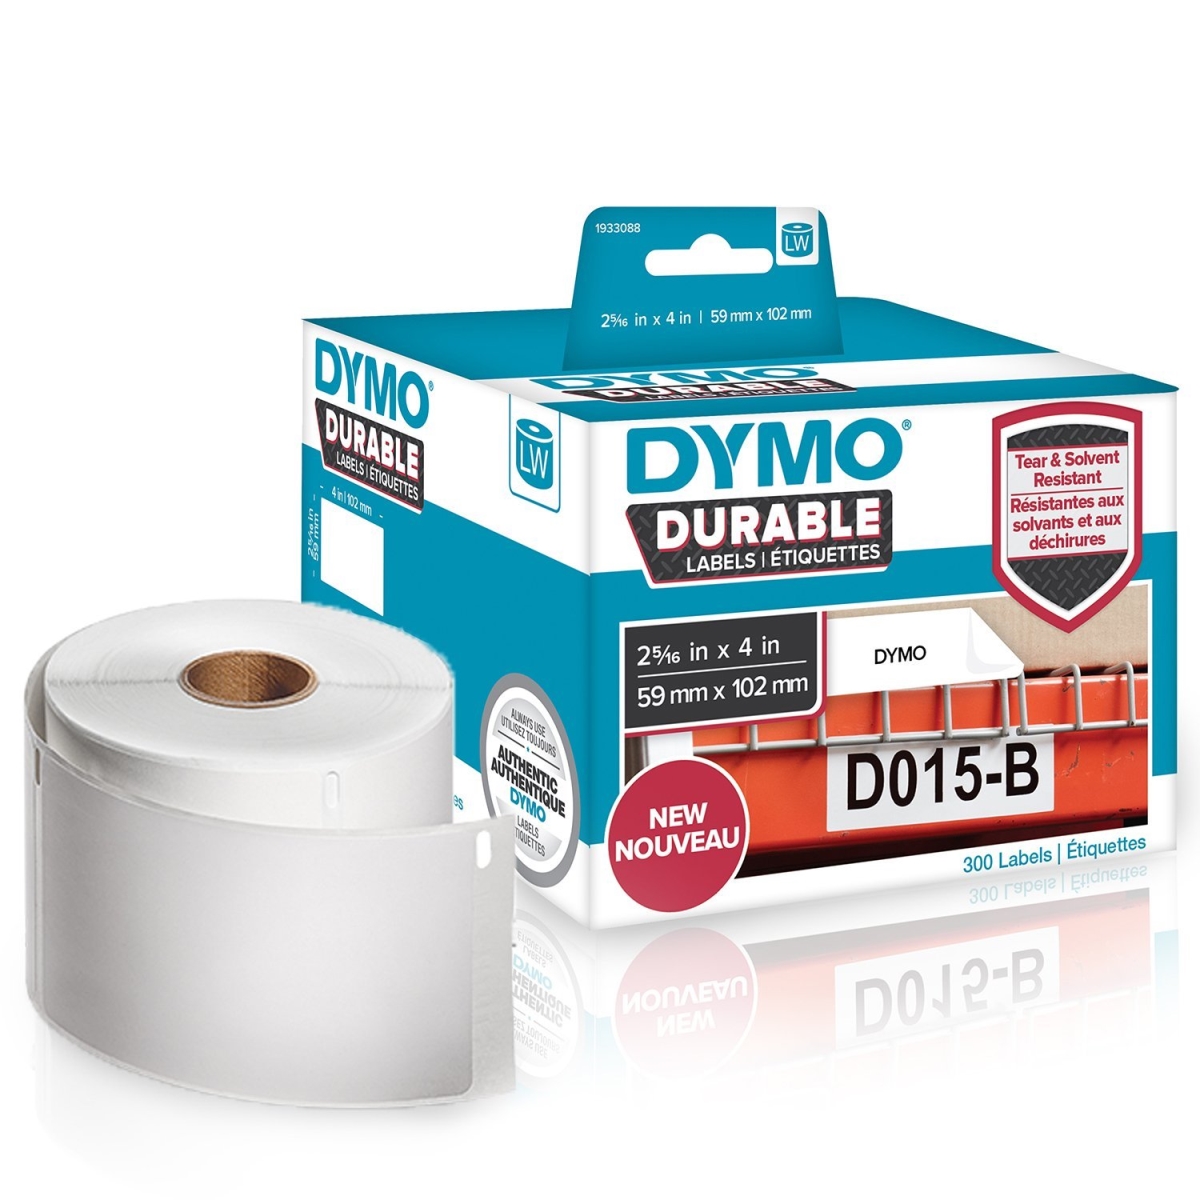 Picture of Dymo 1933088 LW Durable 2-5 16 x 4 in. White Poly, 300 Labels